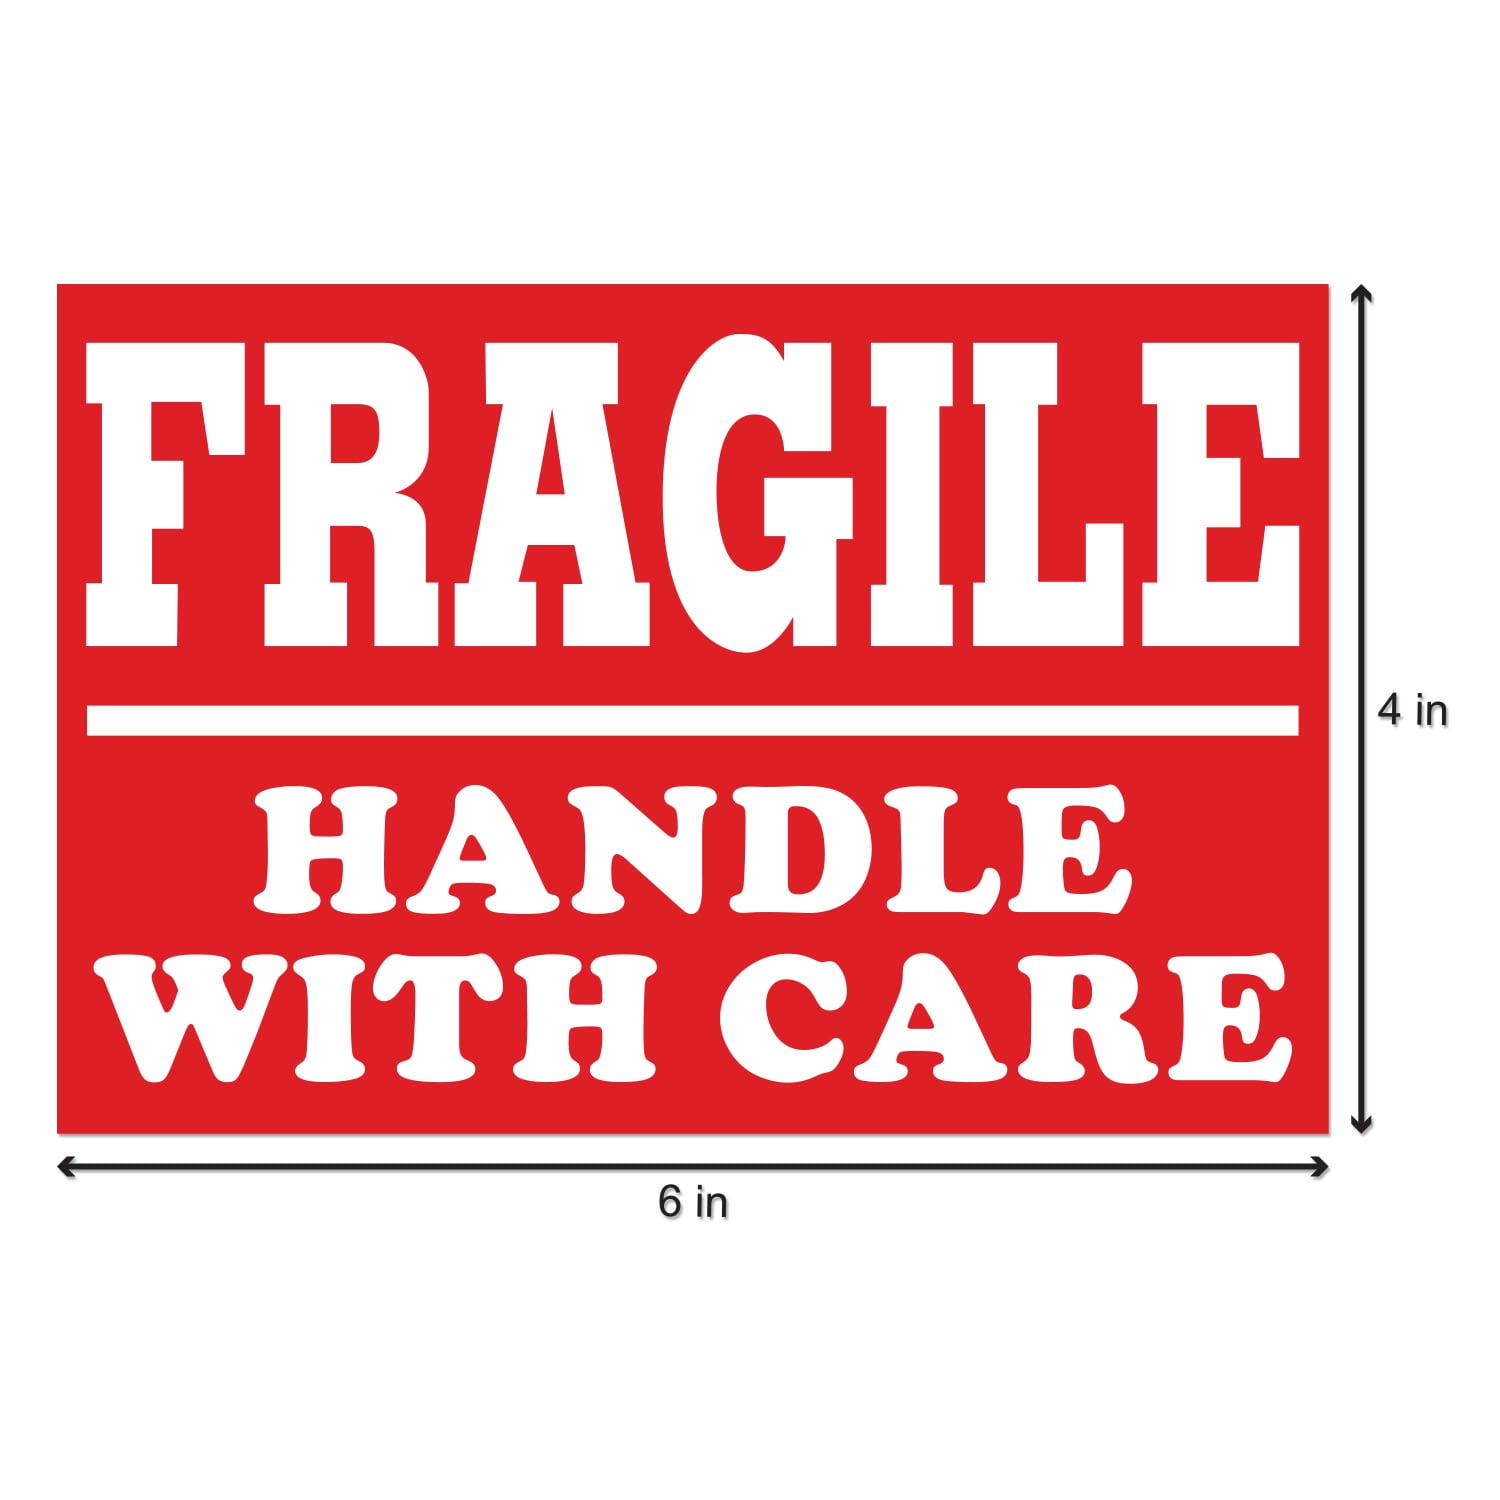 Fragile stickers